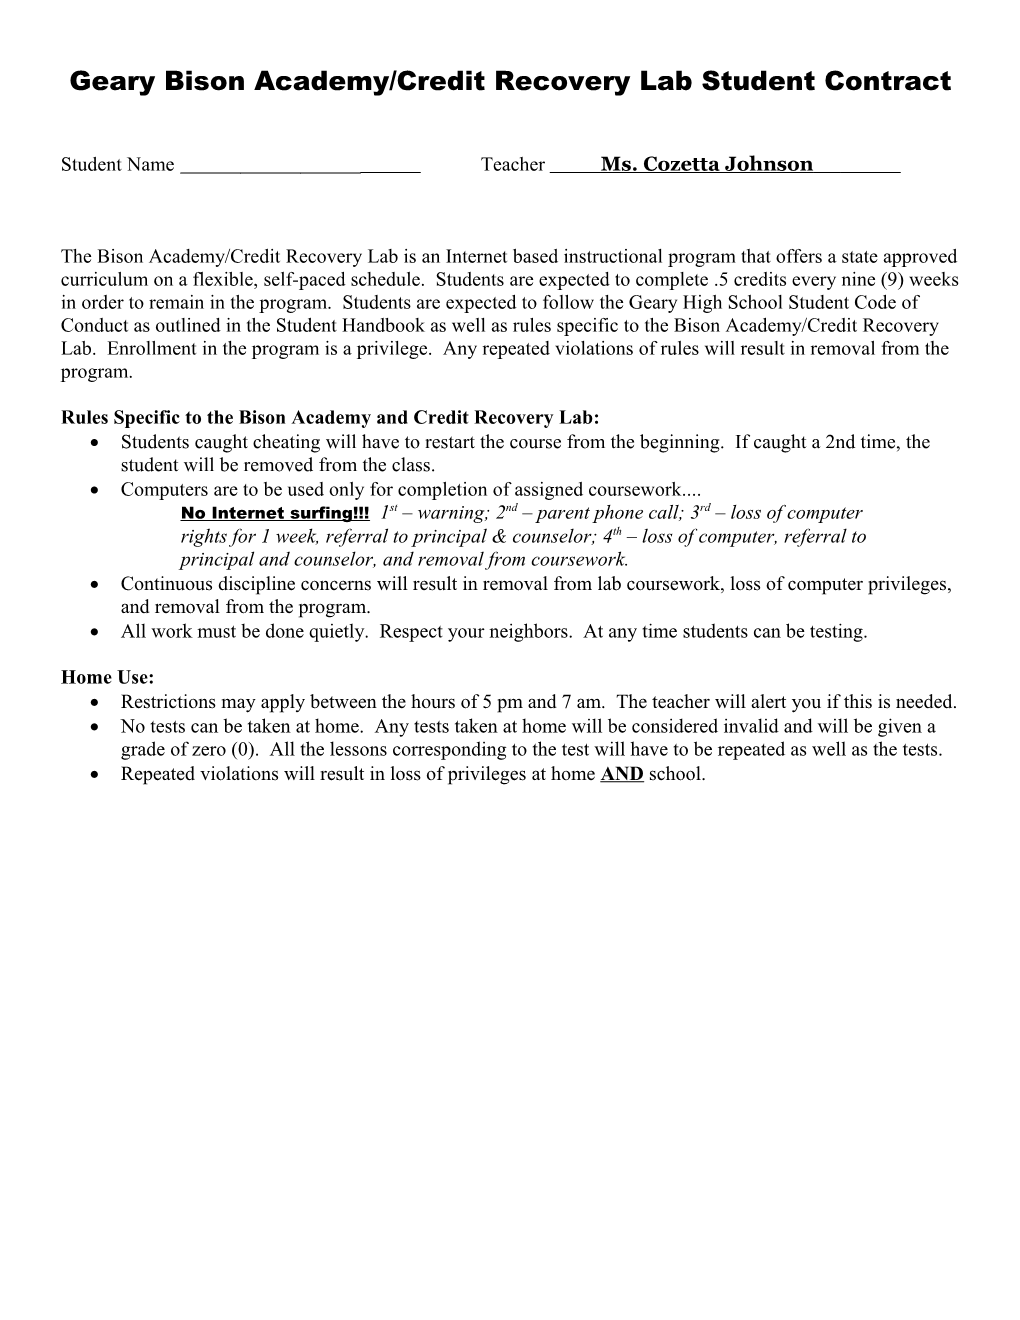 Geary Bison Academy and Credit Recovery Lab Student Contract